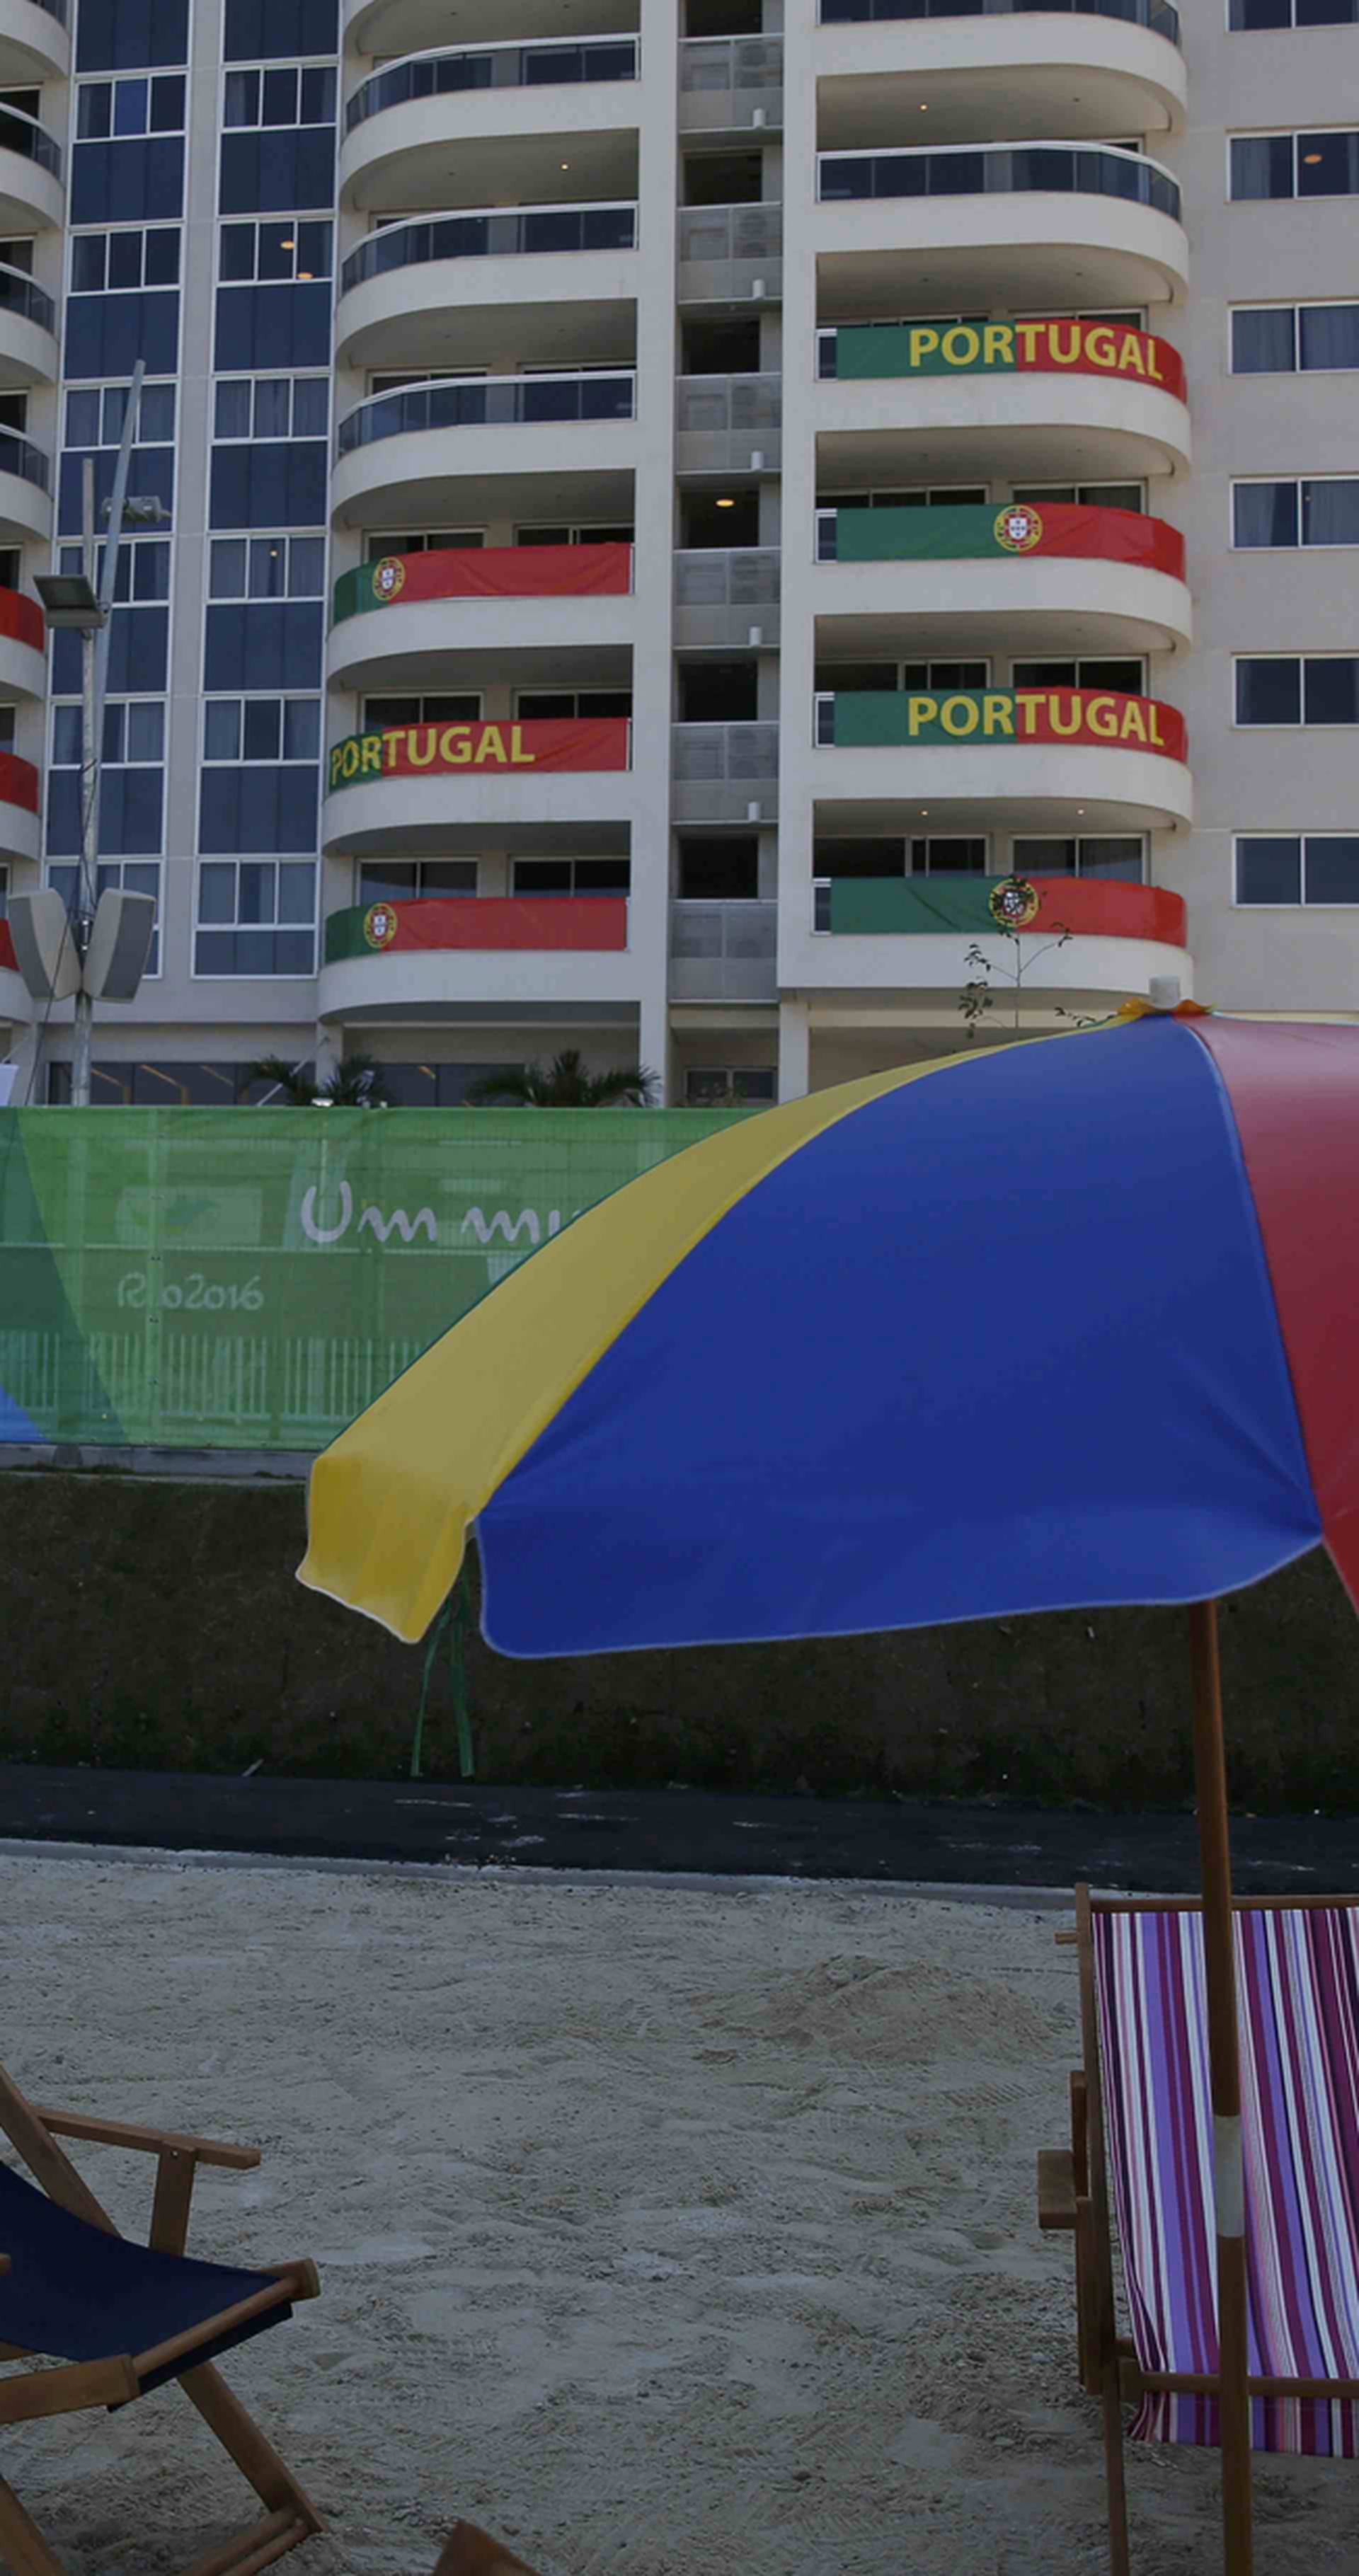 A view of one of the blocks of apartments where Portugal's athletes are supposed to stay in Rio de Janeiro